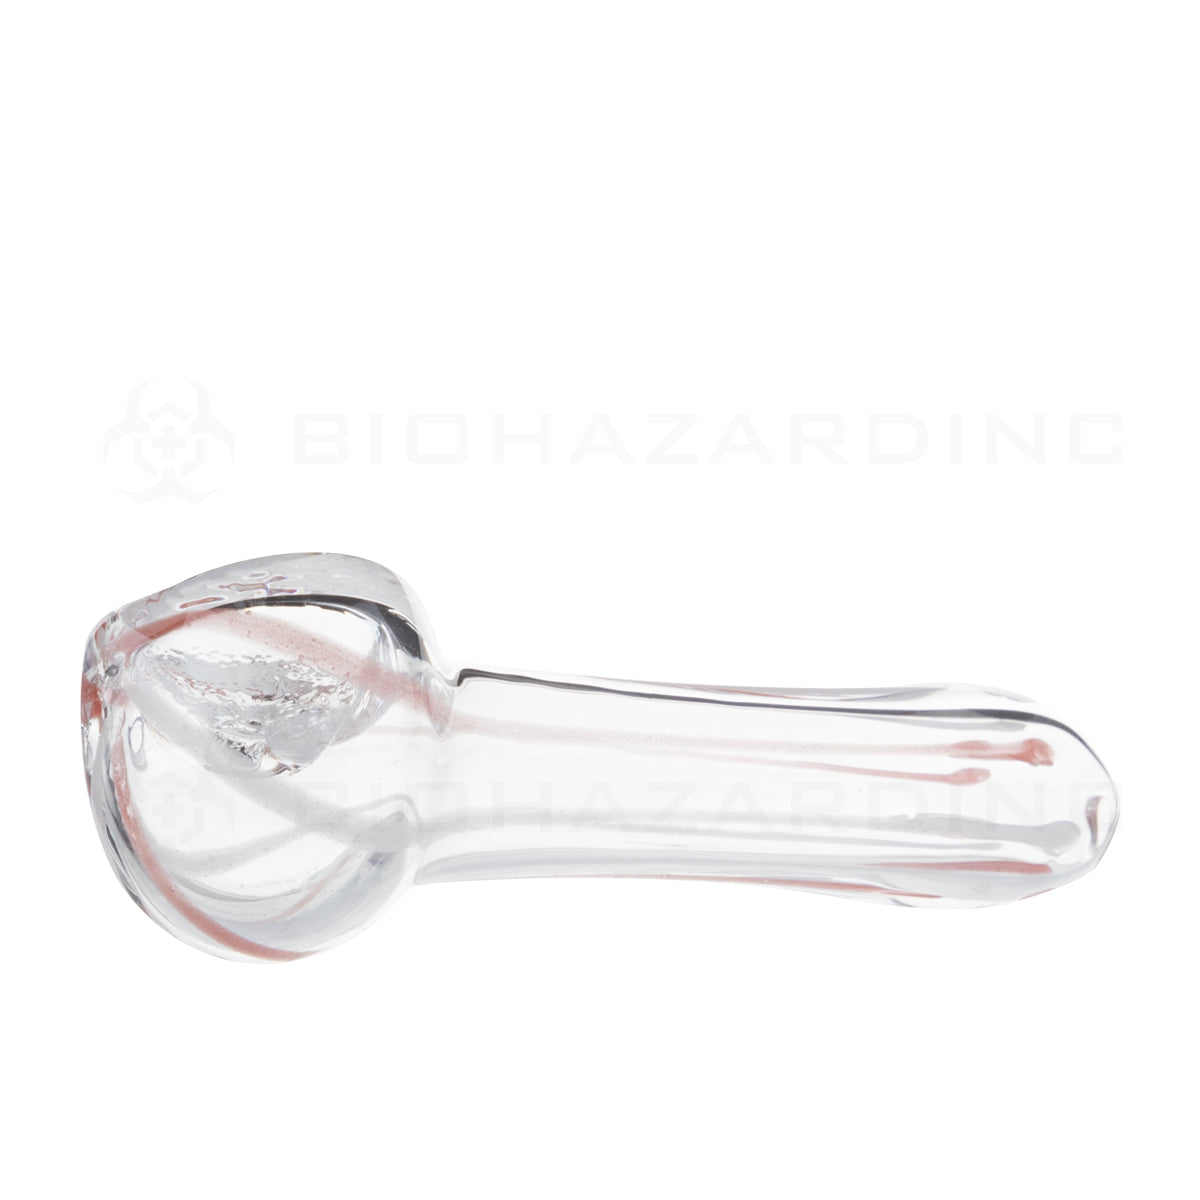 Hand Pipe | Micro Candy Cane Glass - 10 Count | 2-3" - Glass - Assorted Glass Hand Pipe Biohazard Inc   